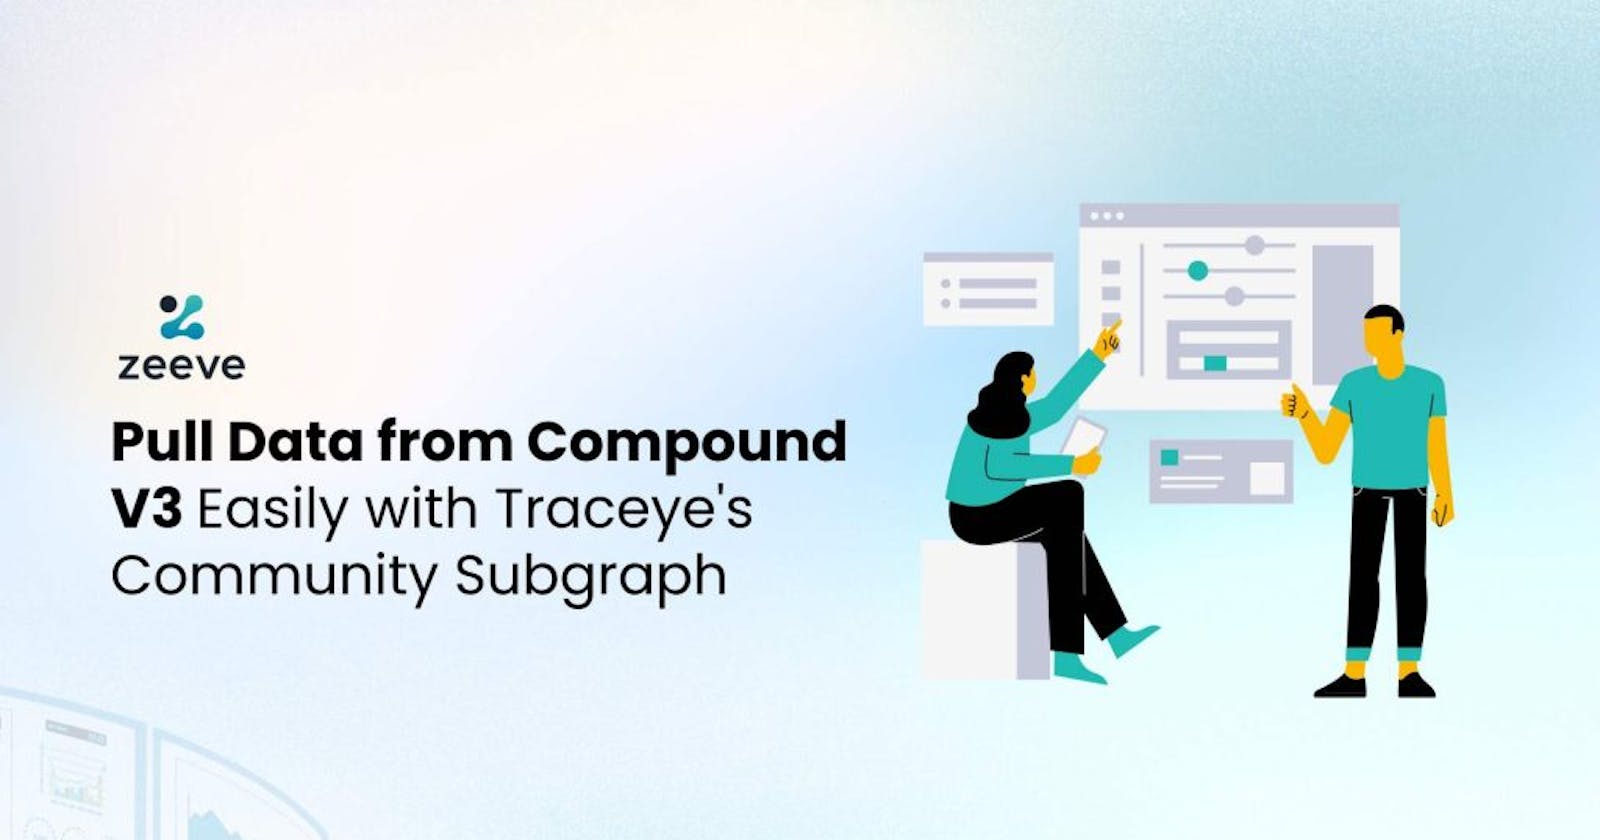 Pull Data from Compound V3 Easily with Traceye’s Community Subgraph